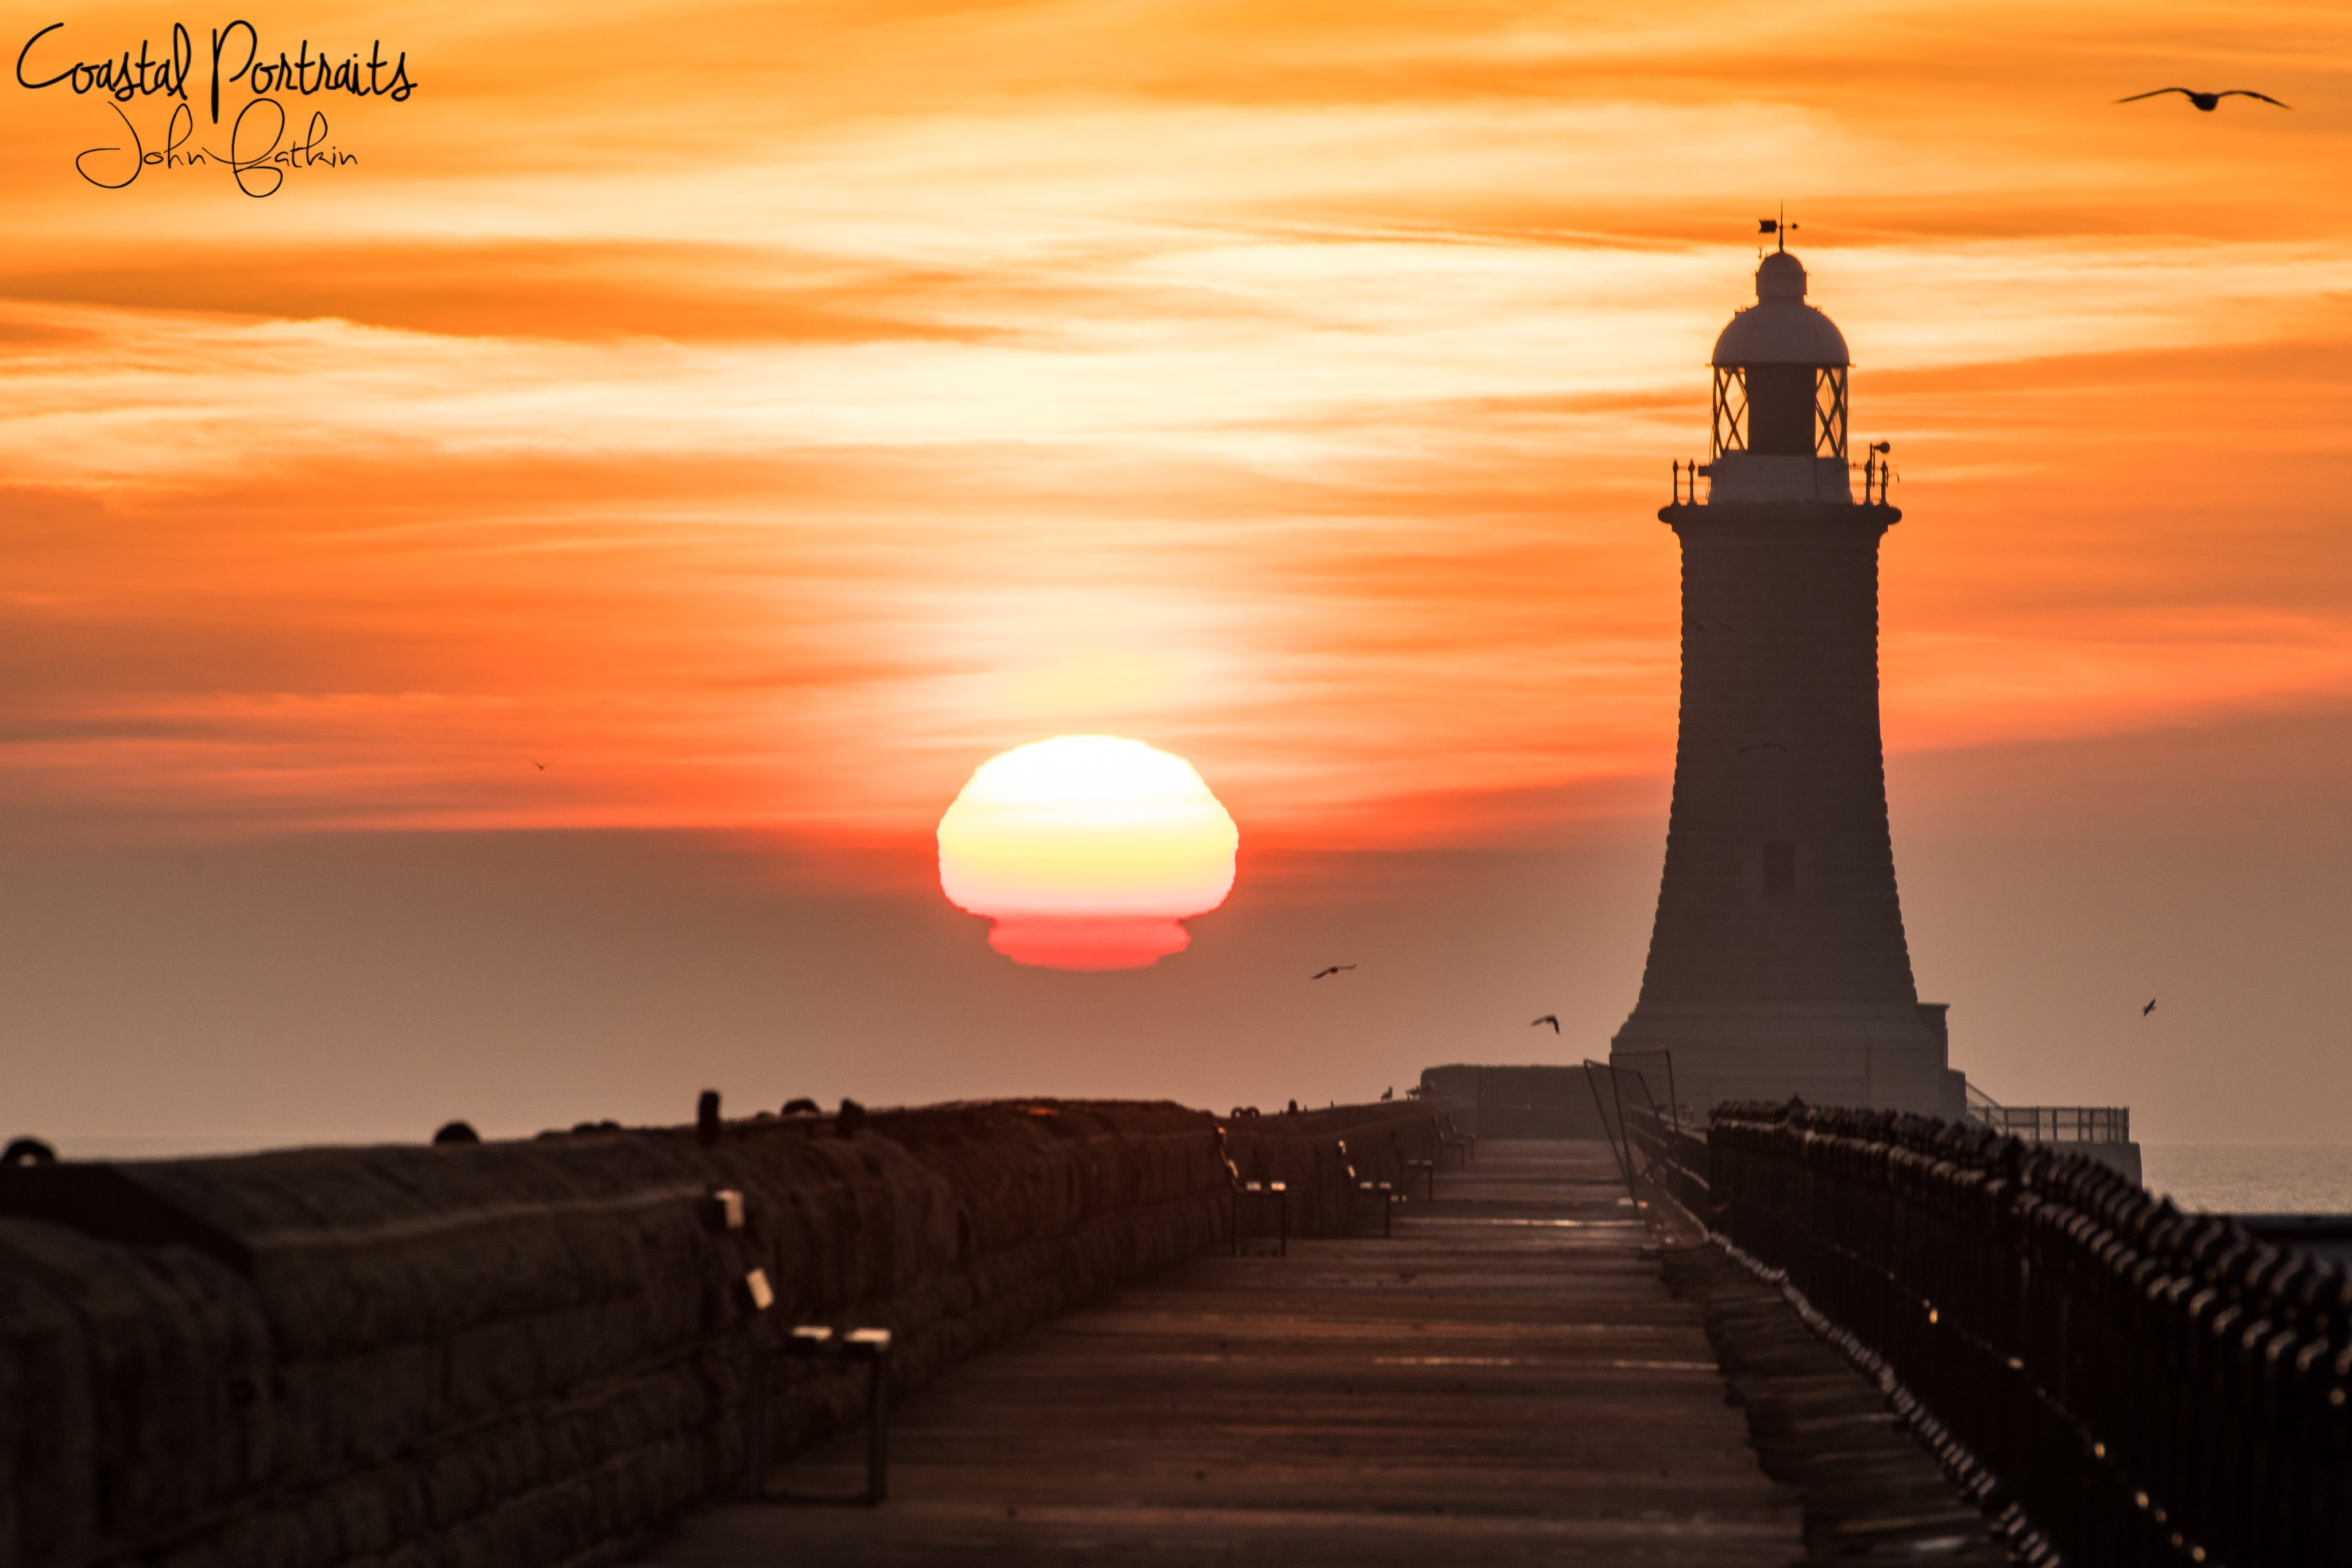 3rd Place The North Tyne Pier & Lighthouse by Coastal Portraits @johndefatkin